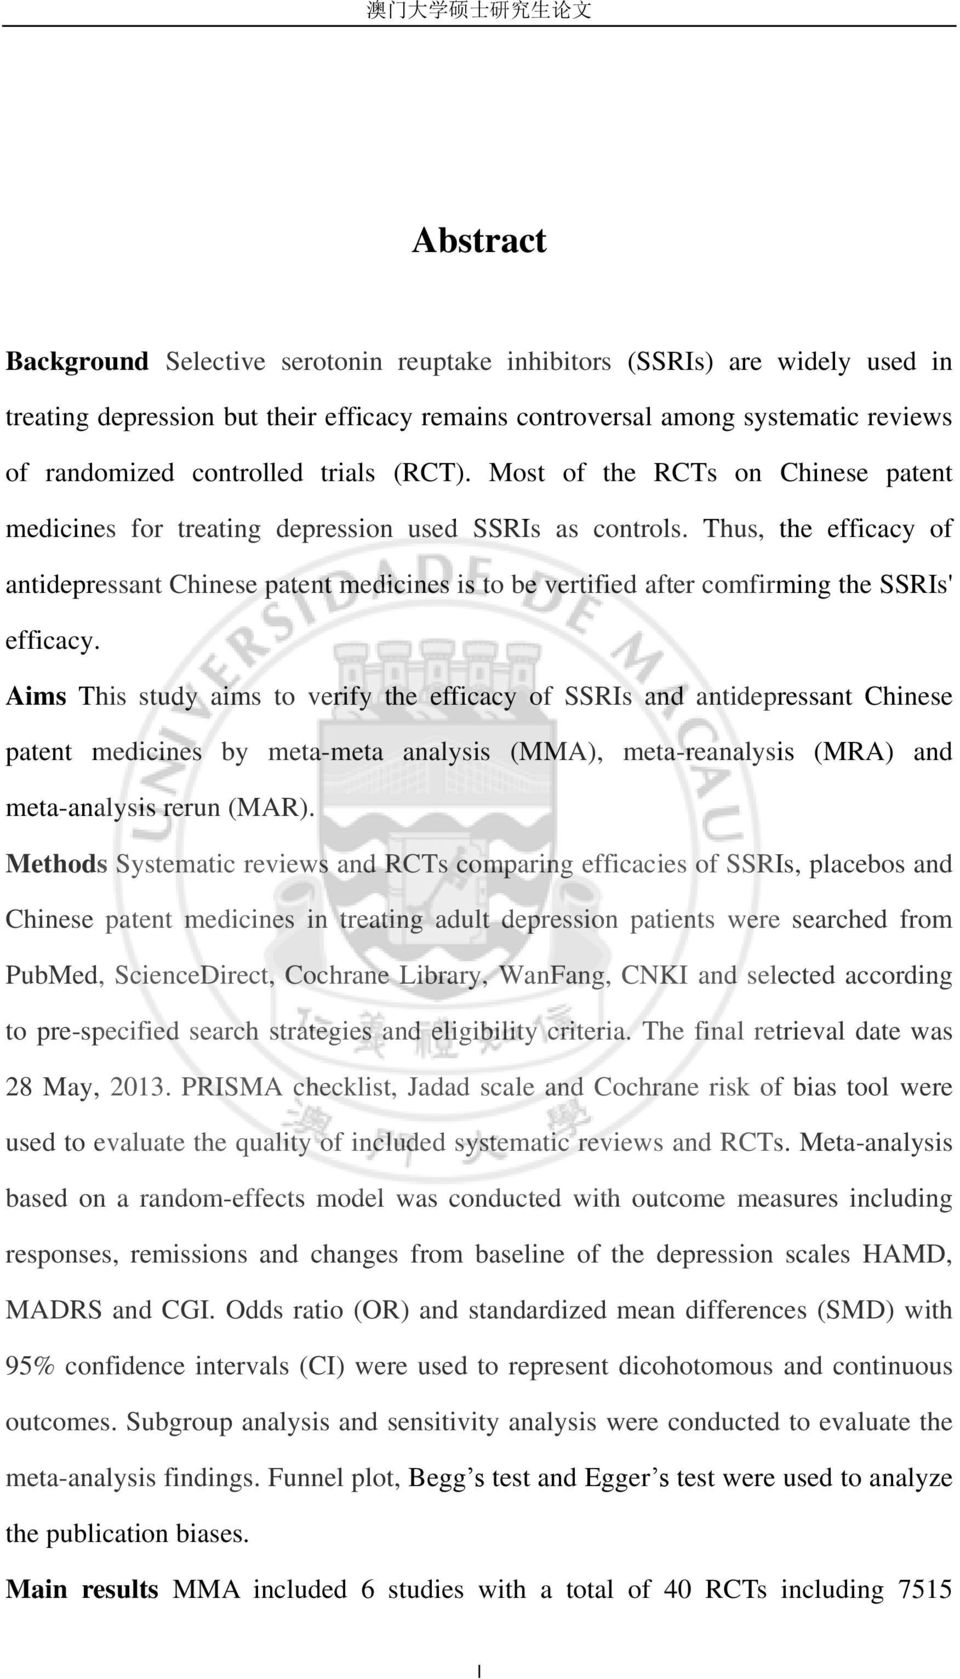 Thus, the efficacy of antidepressant Chinese patent medicines is to be vertified after comfirming the SSRIs' efficacy.